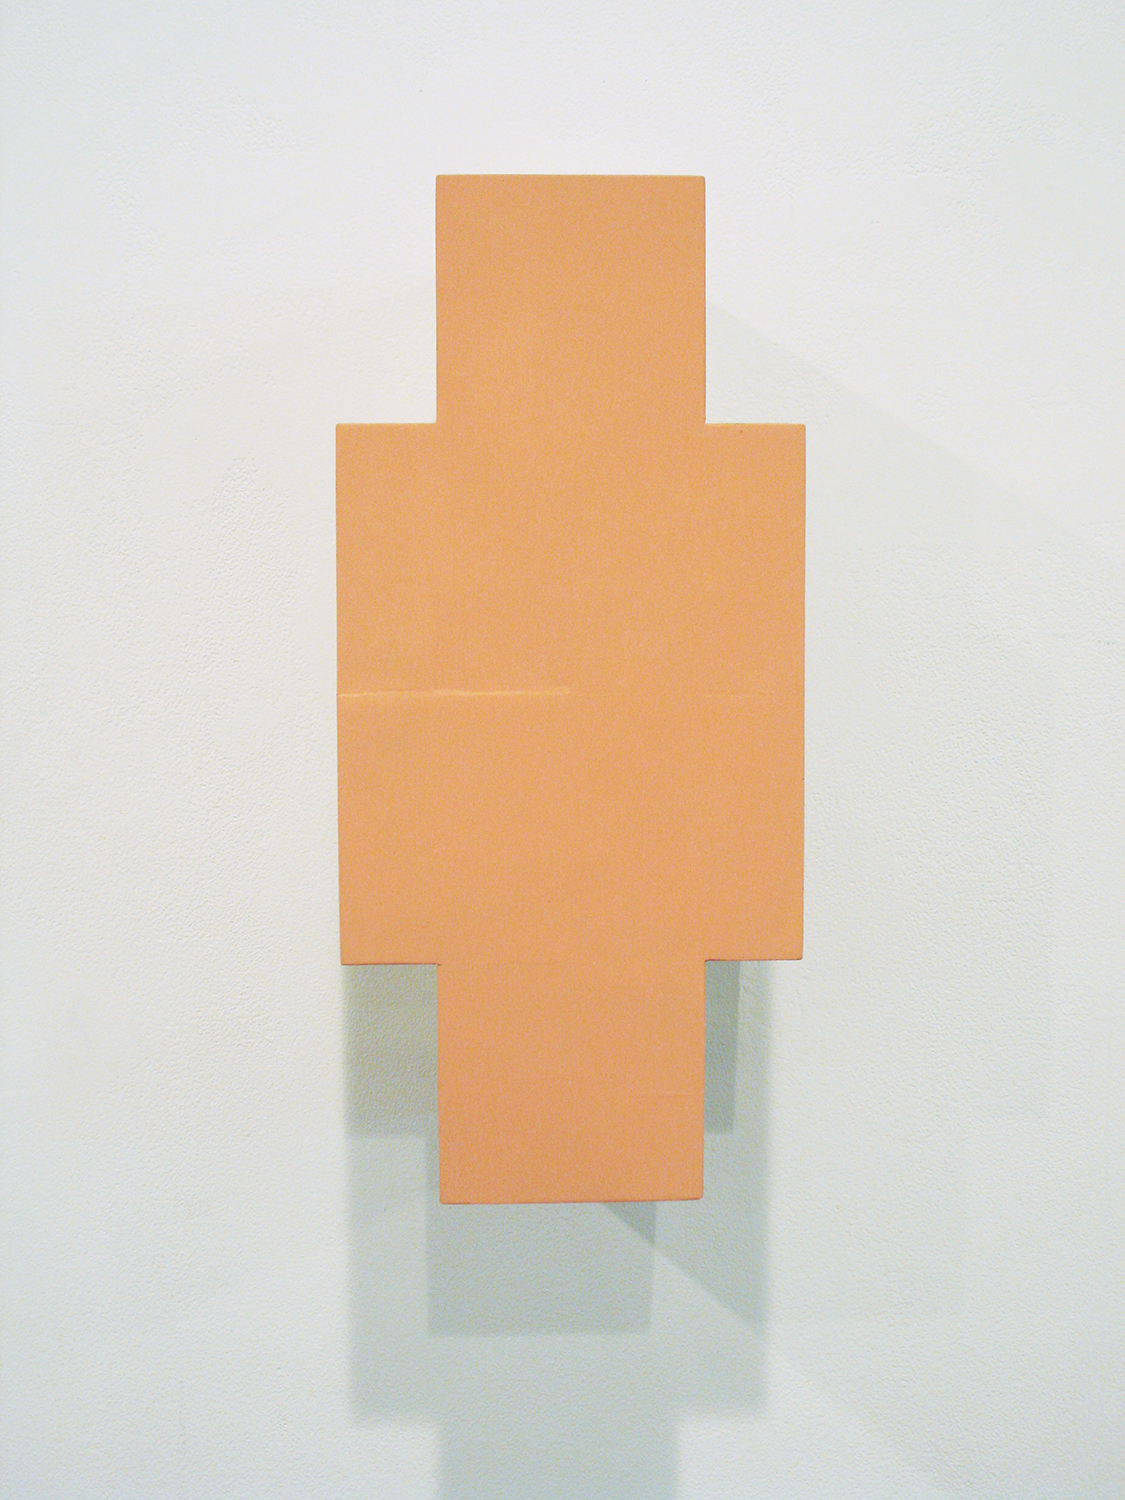 TS9308｜Colour gesso on laminated soft wood｜37.5 x 17 x 20 cm｜1993